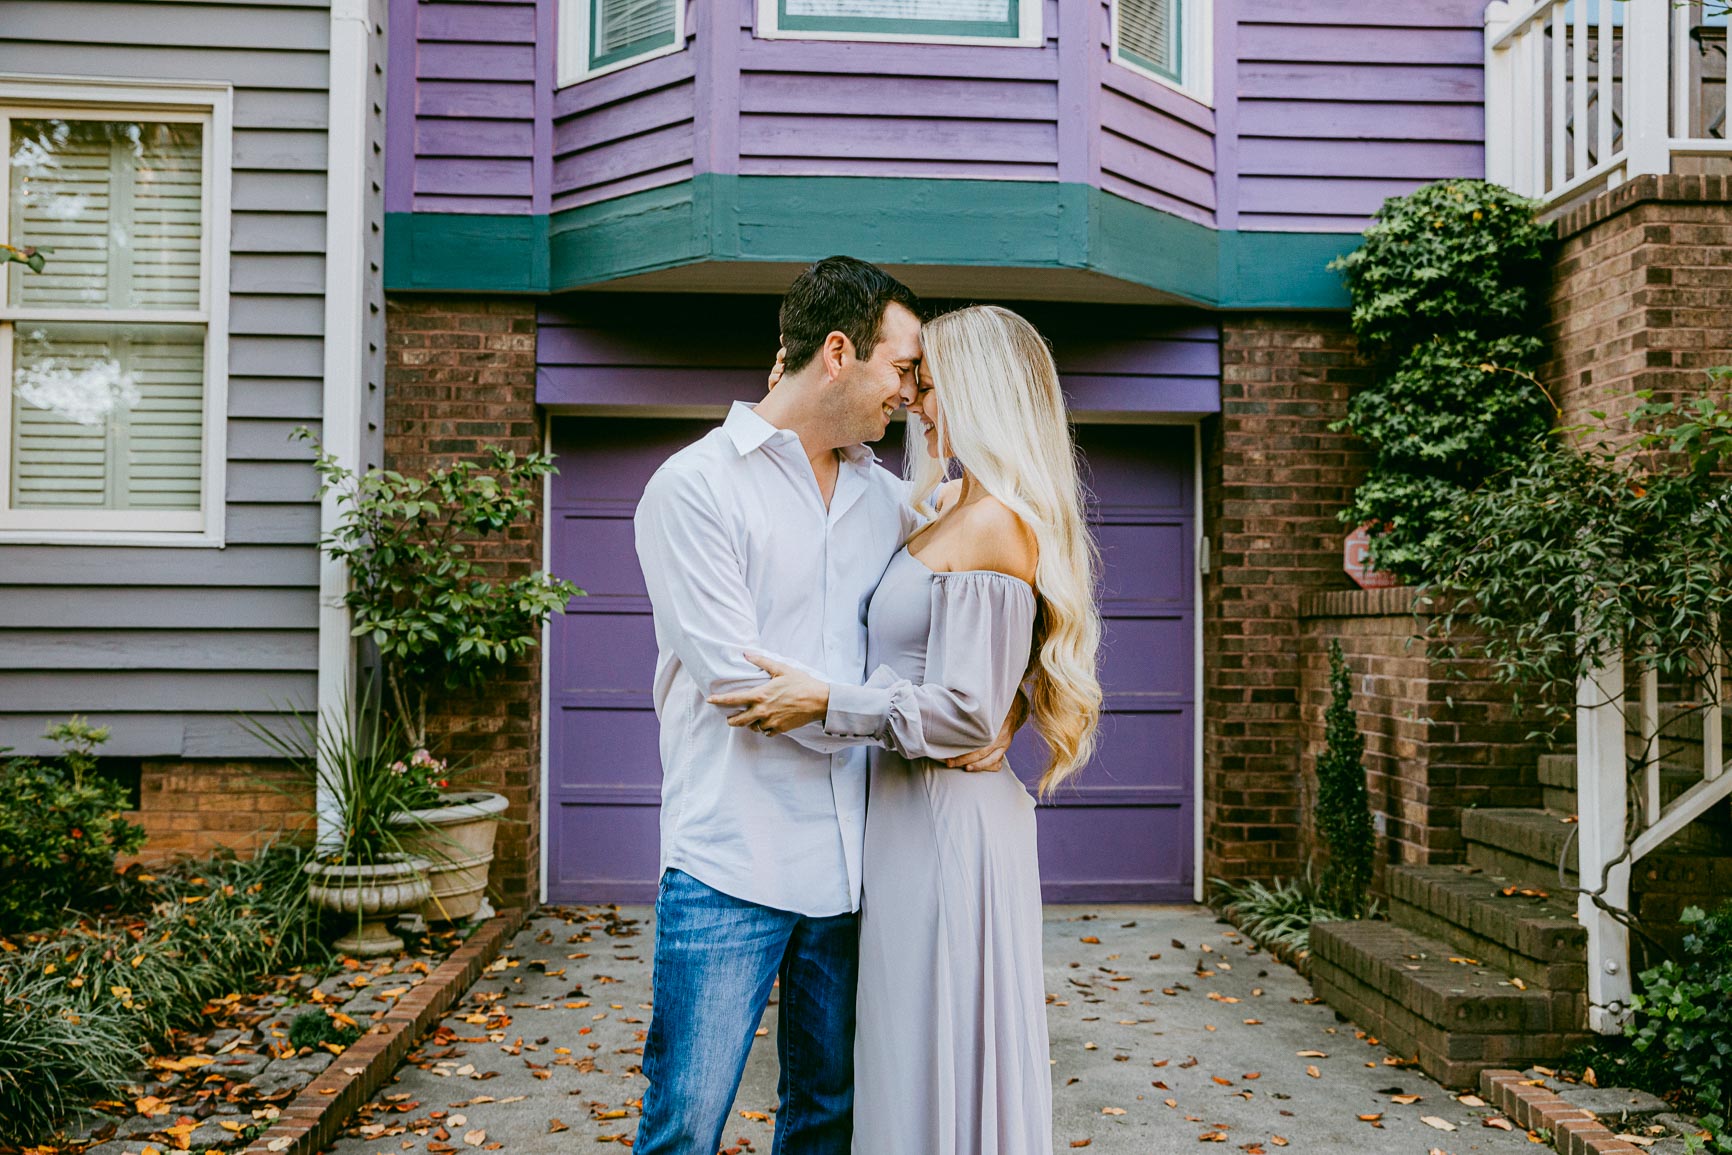 fall uptown's fourth ward engagement photo shot by Nhieu Tang Photography | nhieutang.com